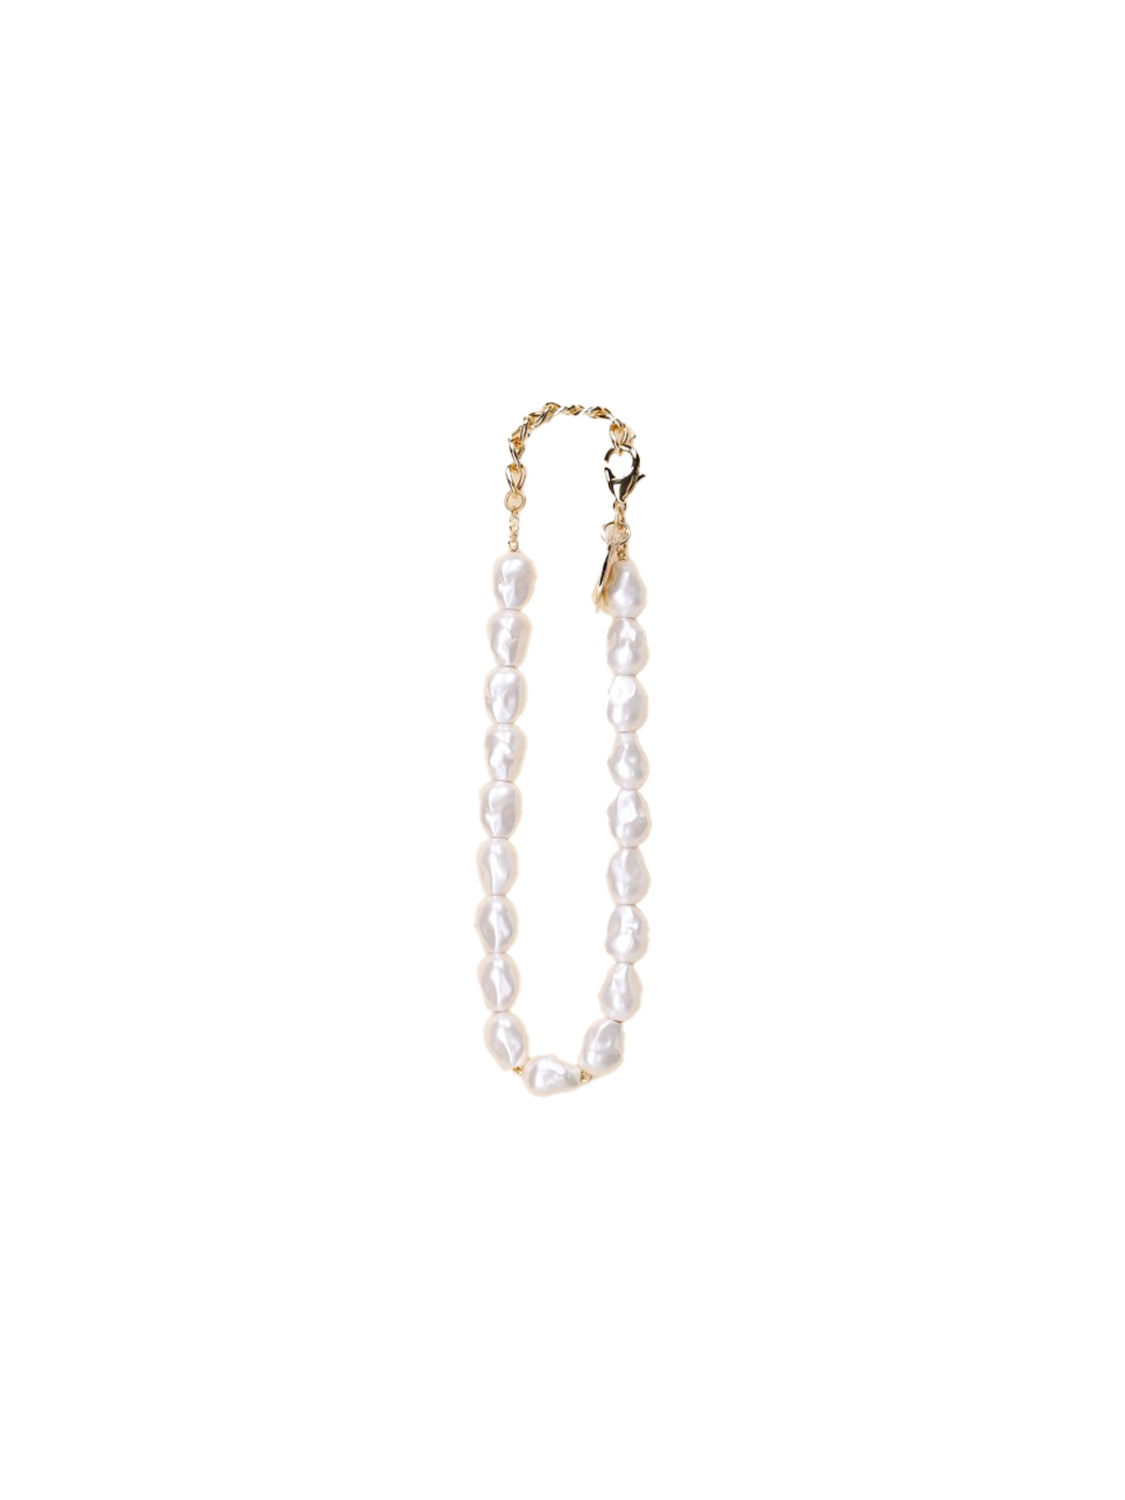 Organic Pearl necklace with pendant 